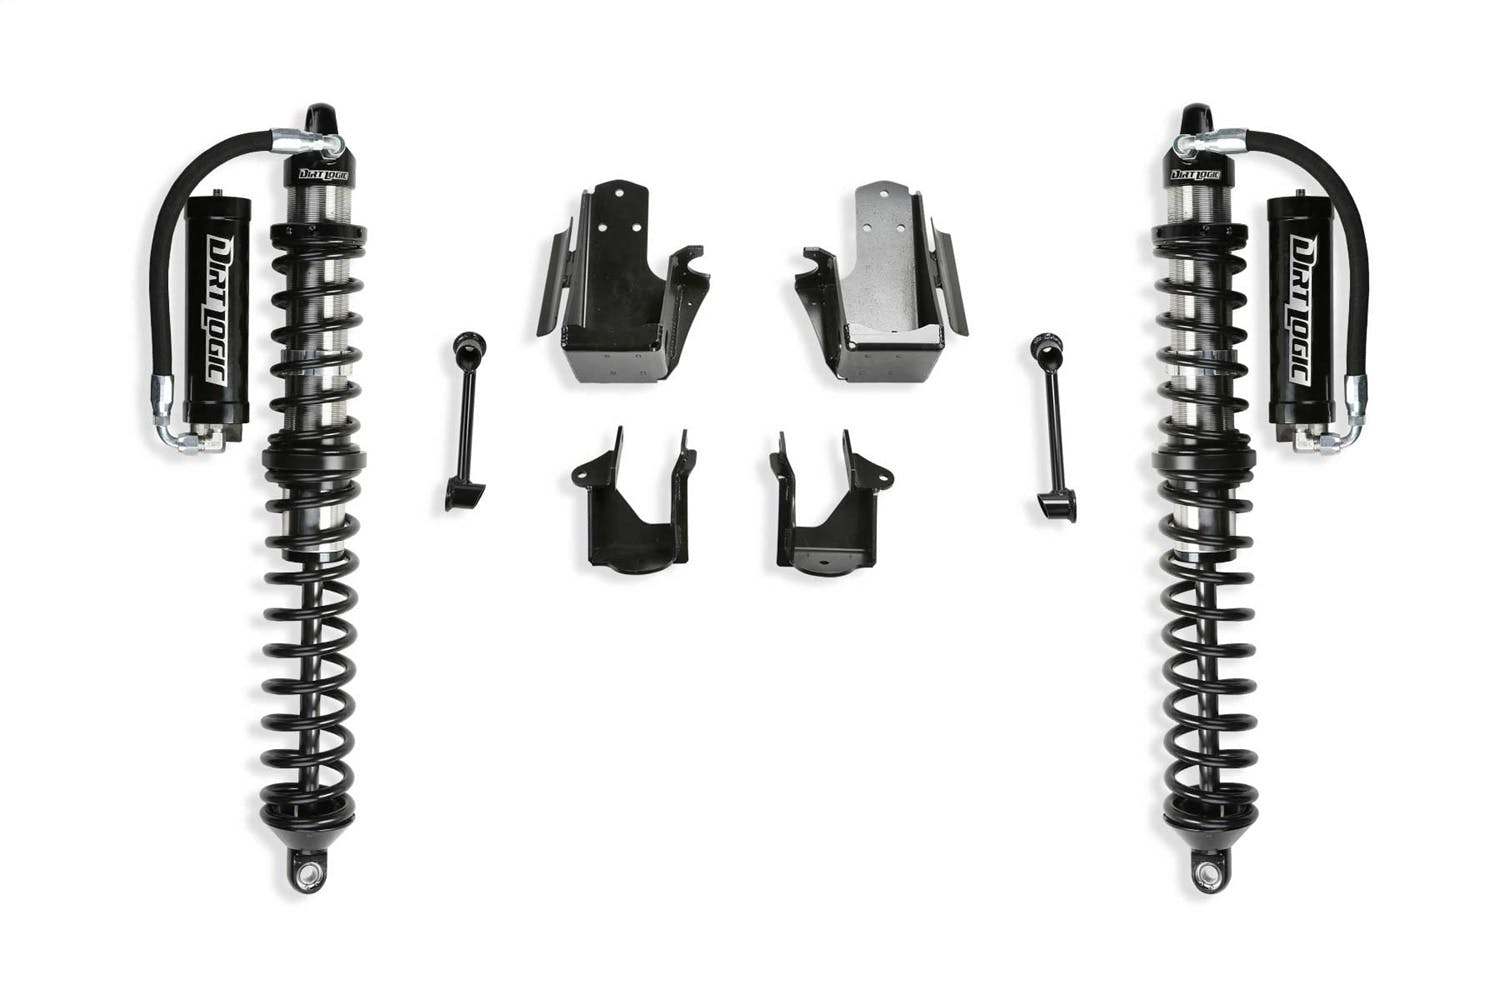 Fabtech K4182DL Crawler Coilover Lift System